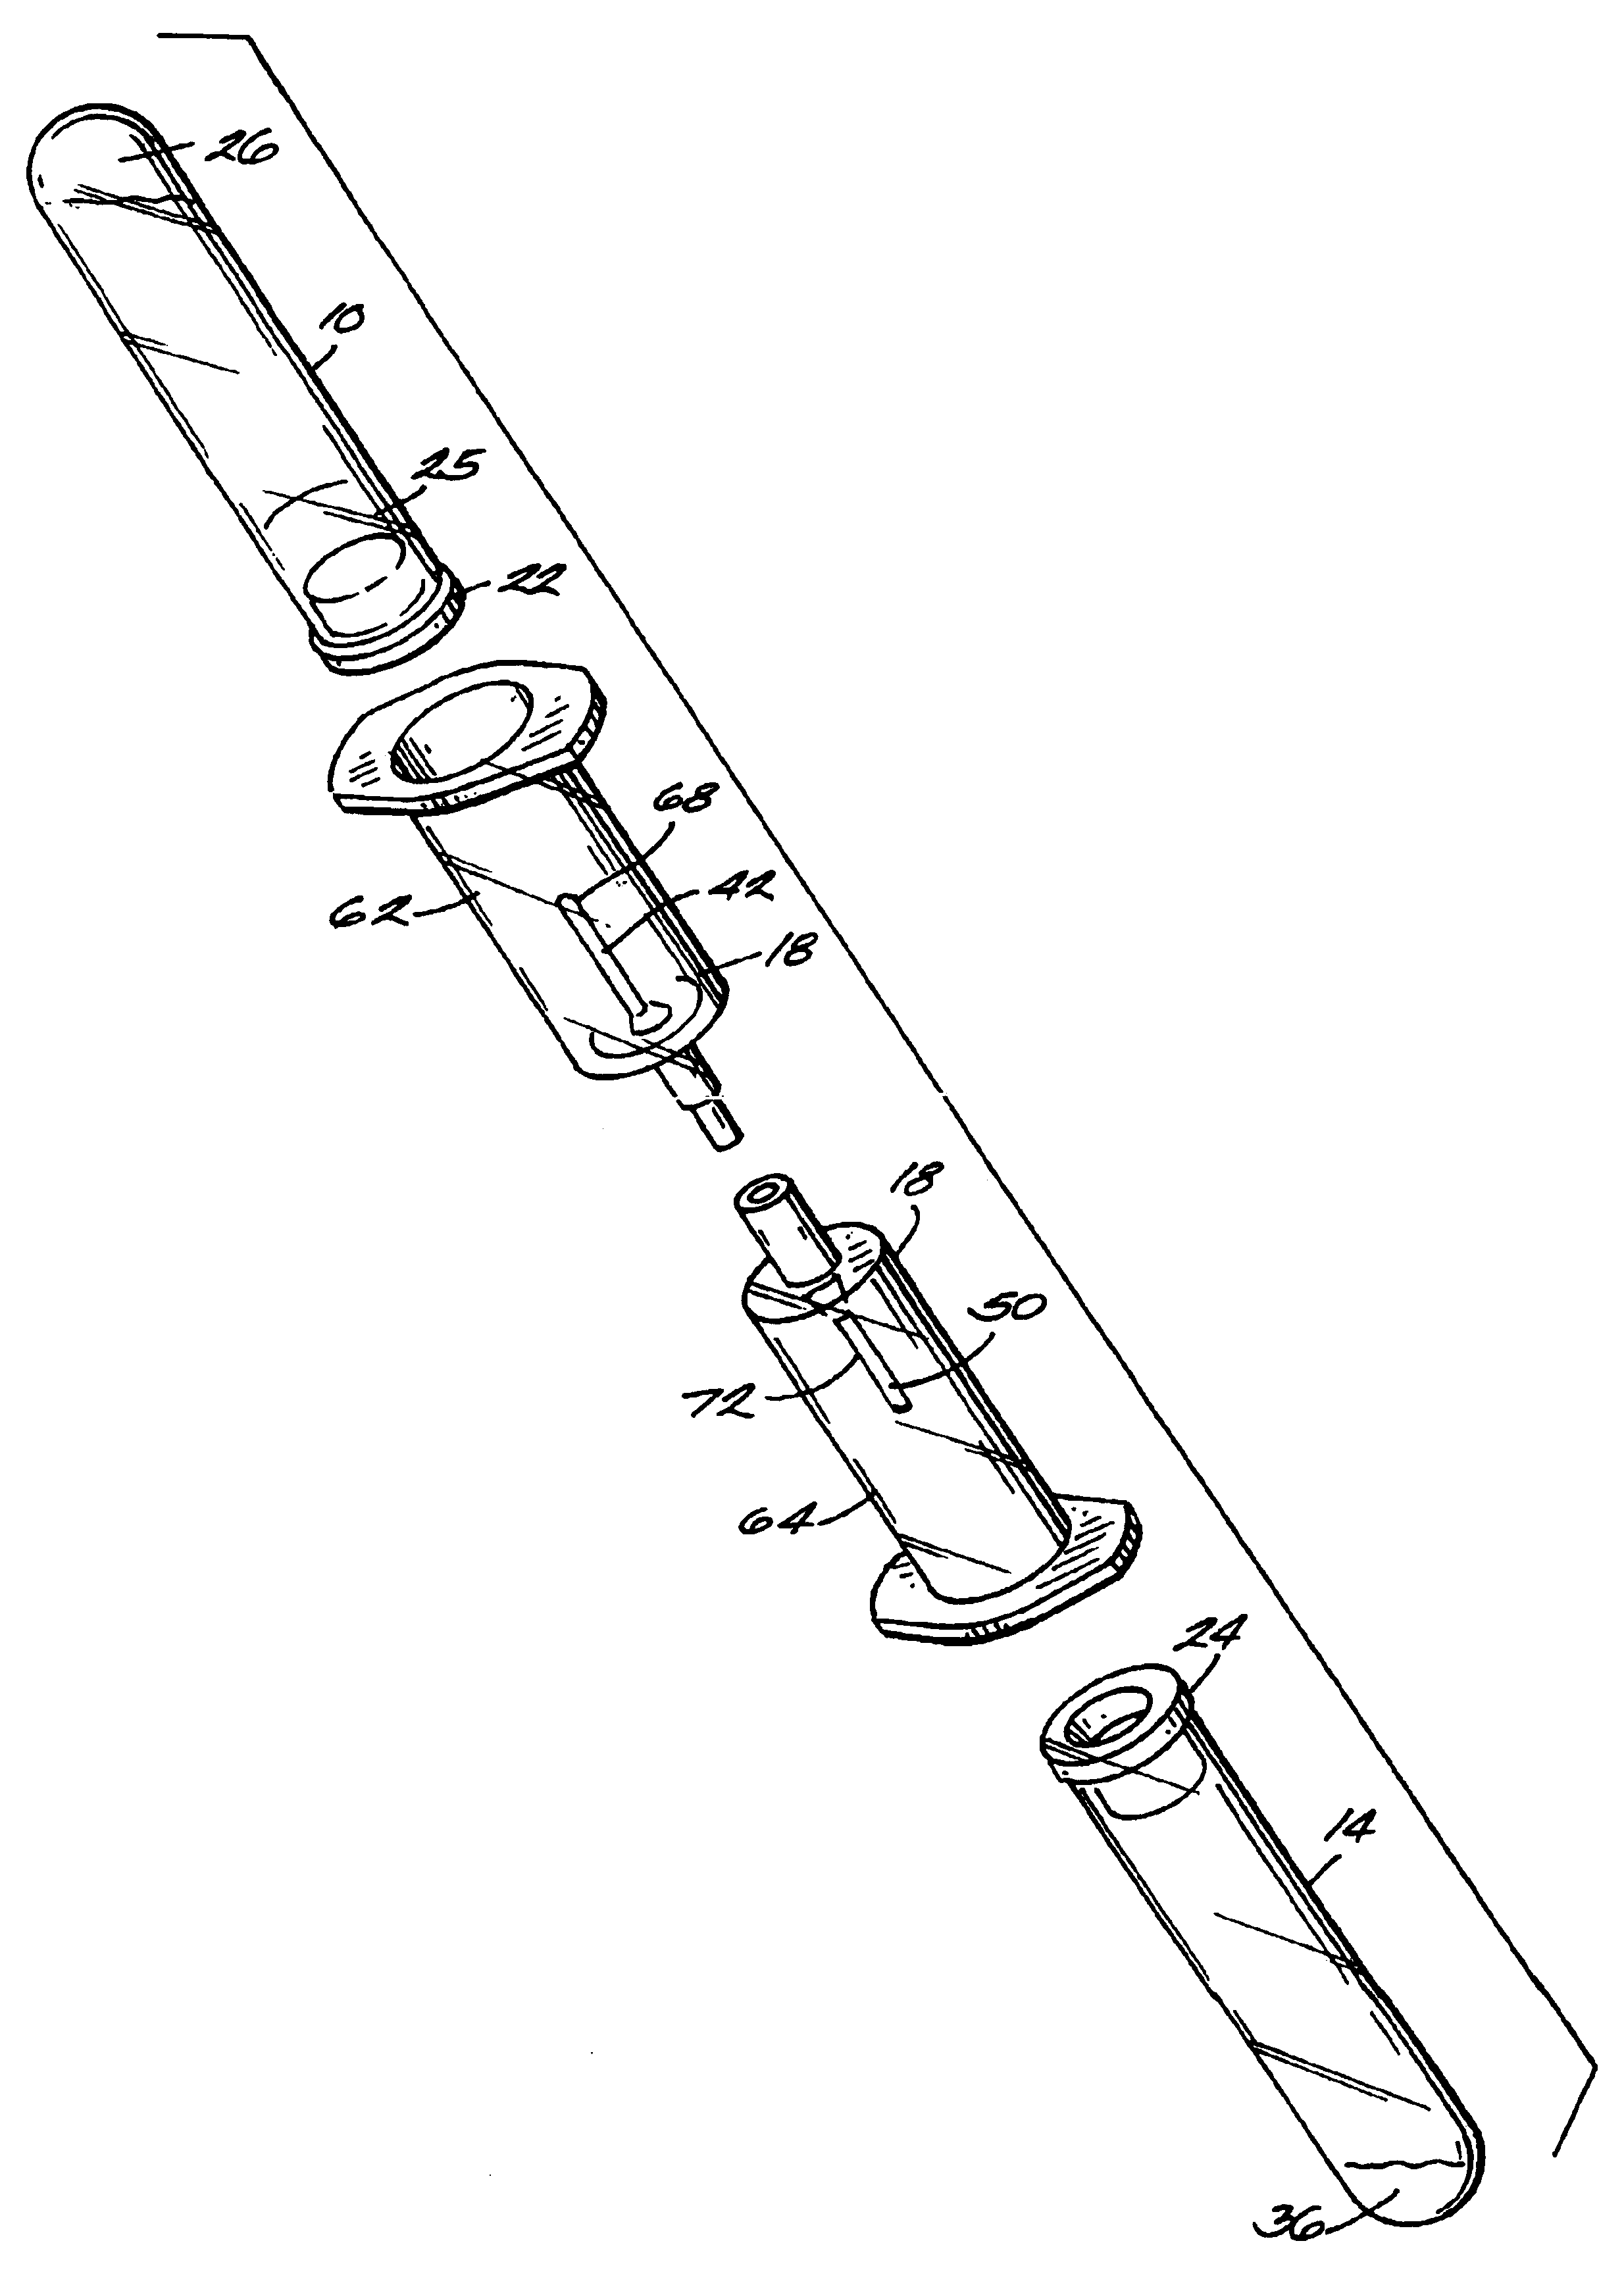 Systems and methods for preparing autologous fibrin glue